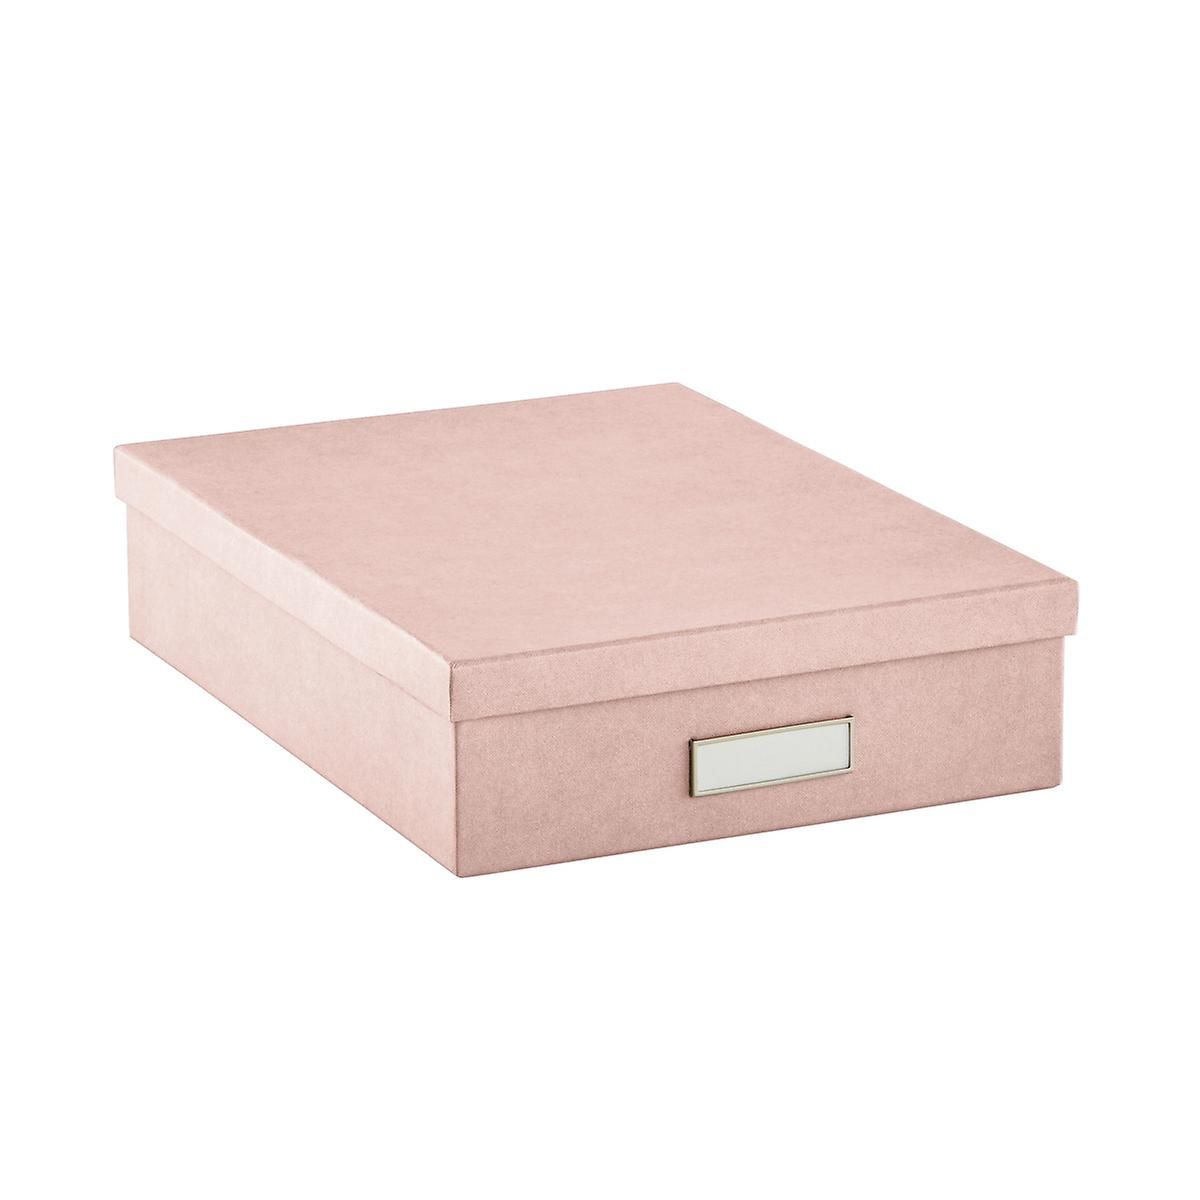 Bigso Blush Stockholm Office Storage Boxes | The Container Store